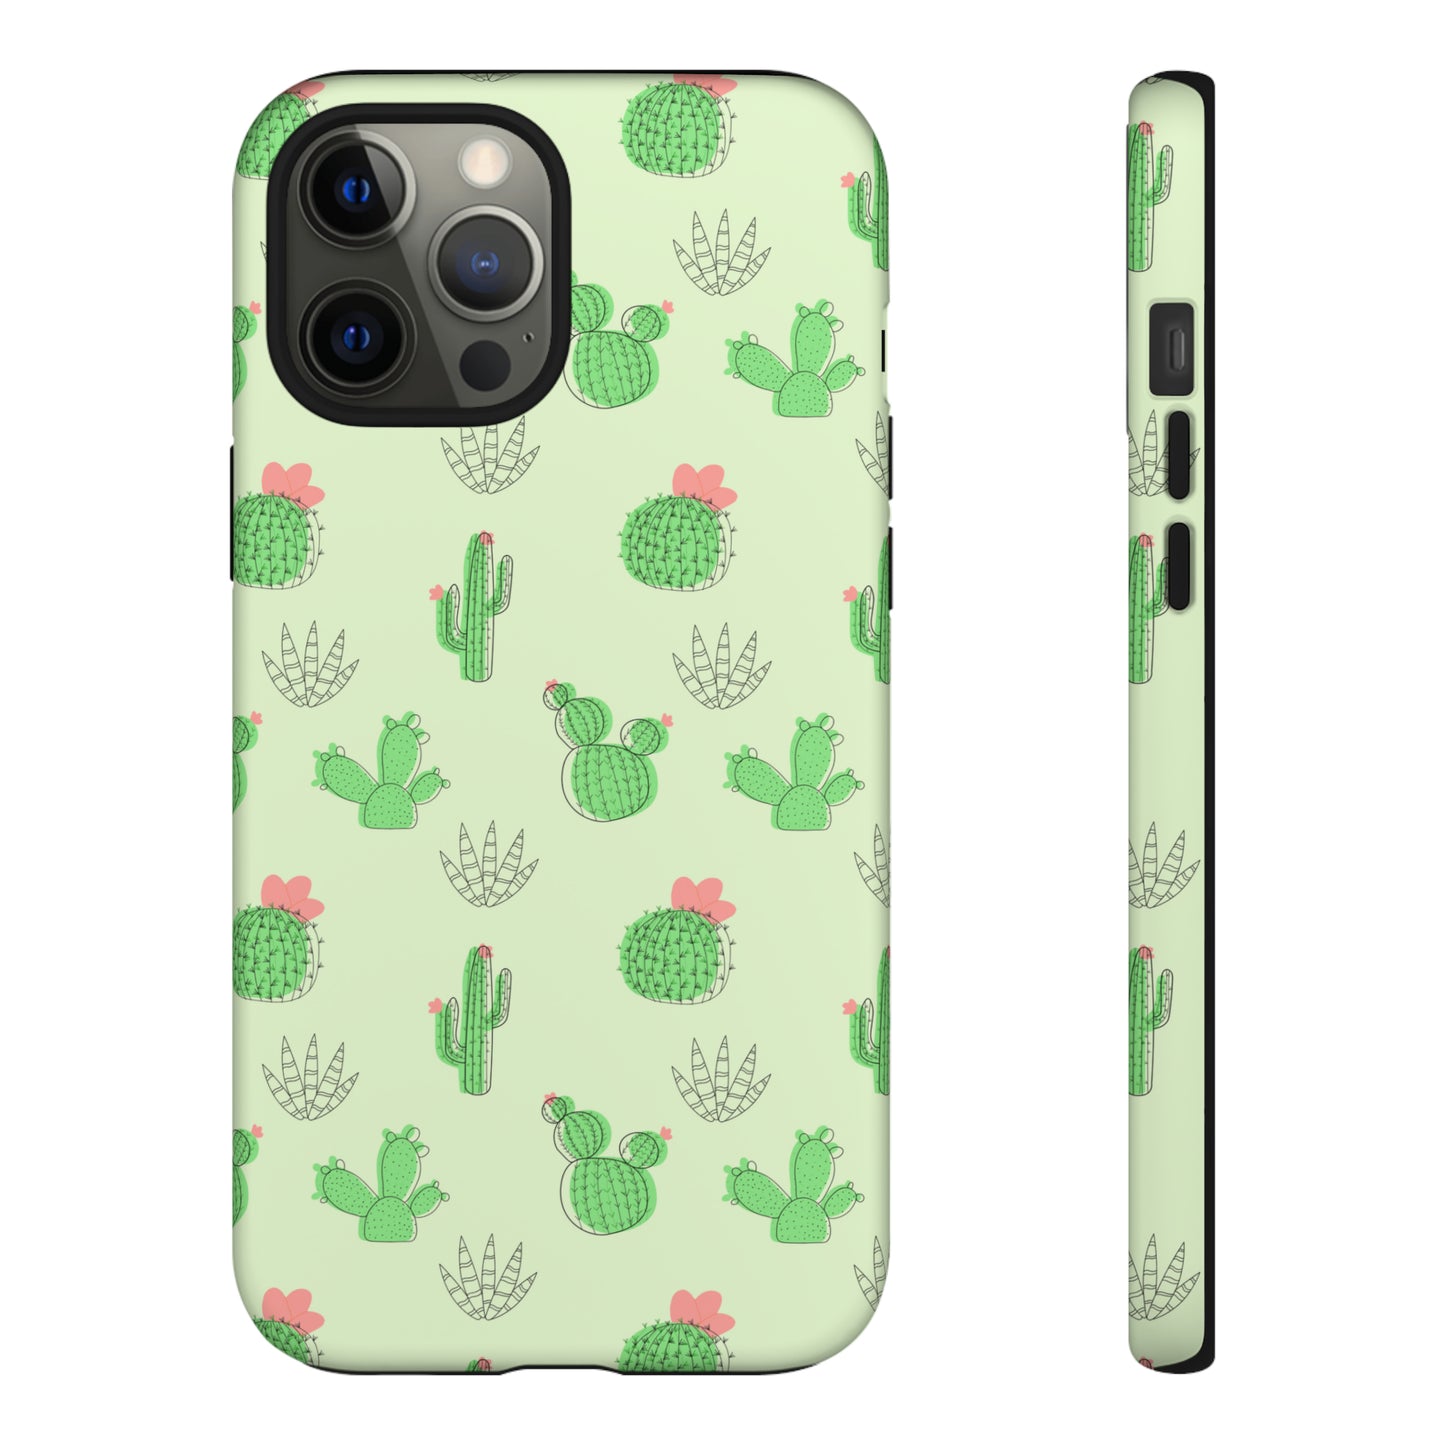 Pointy Friends - Tough Phone Case